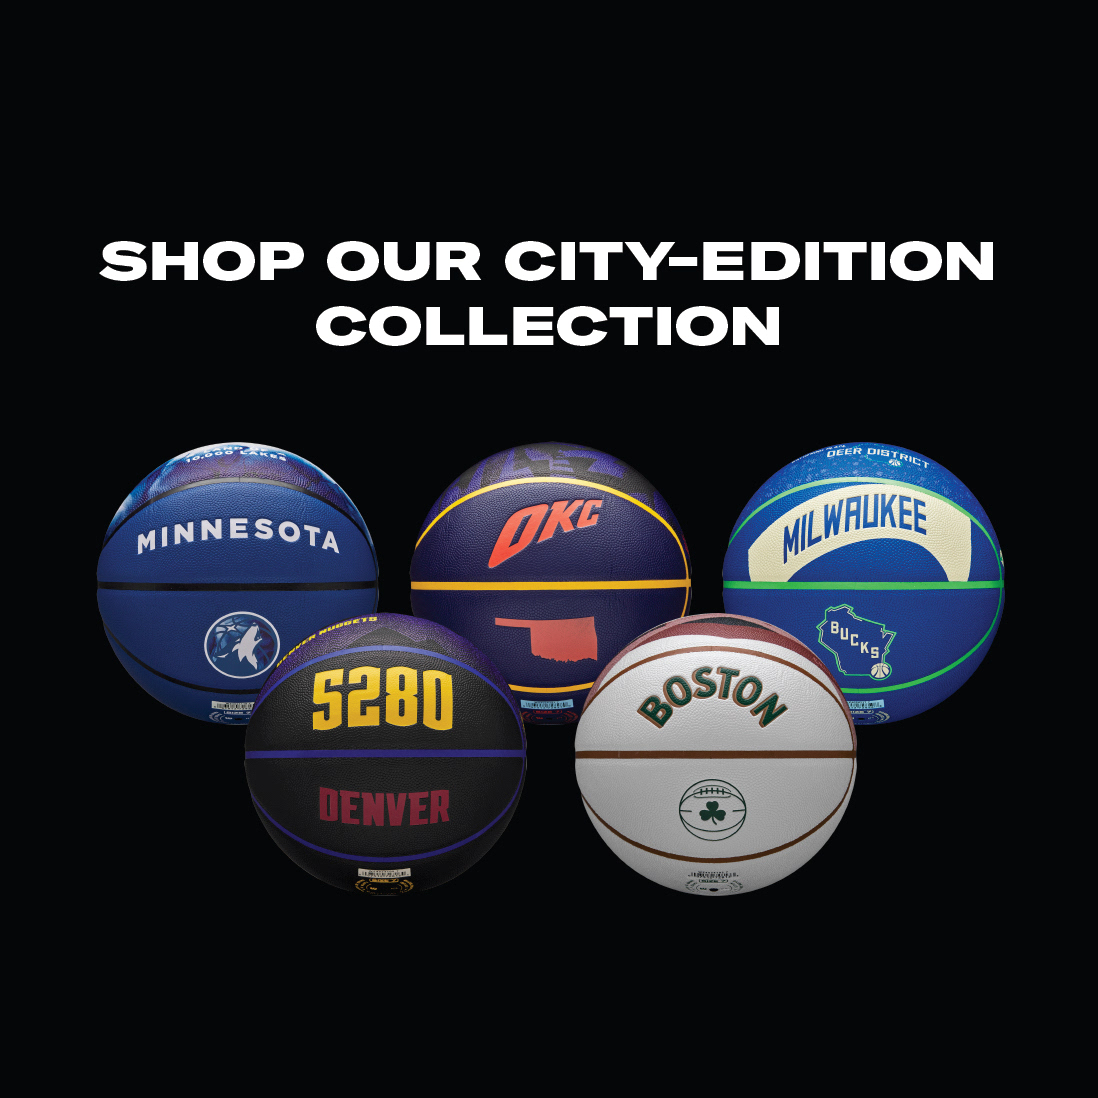 Now more than ever, as the playoff push is in full swing, it’s time to rep your team by shopping our full City-Edition product line. Available exclusively below! #WilsonBasketball #BondedByBall #NBA - - ➡️: bit.ly/TeamProductPDP - -